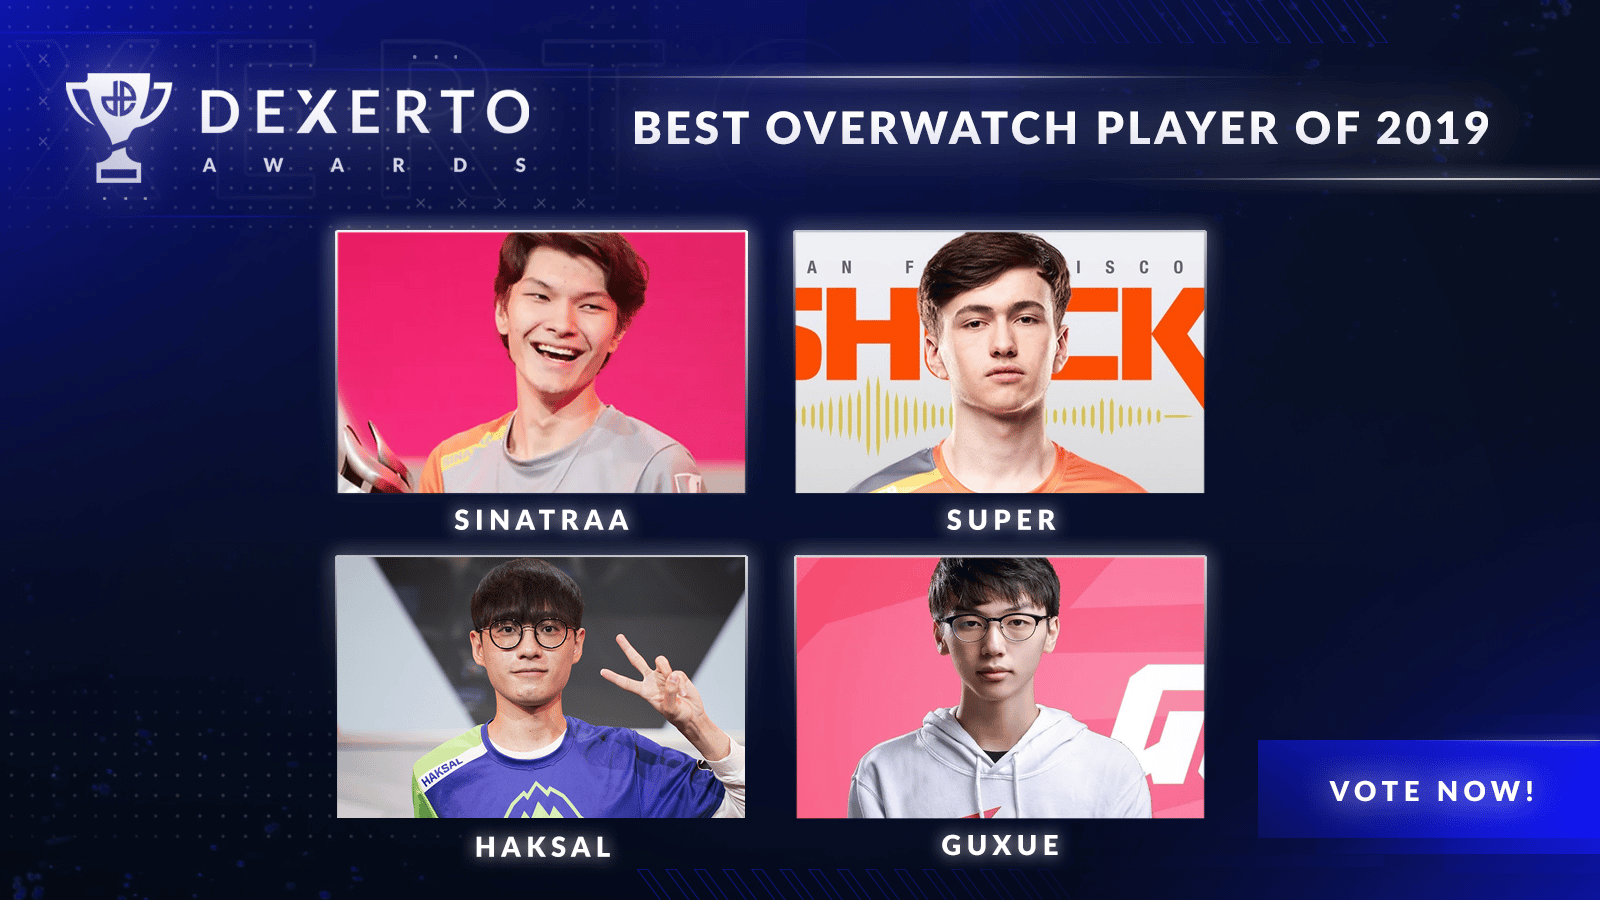 The best Overwatch players of 2019